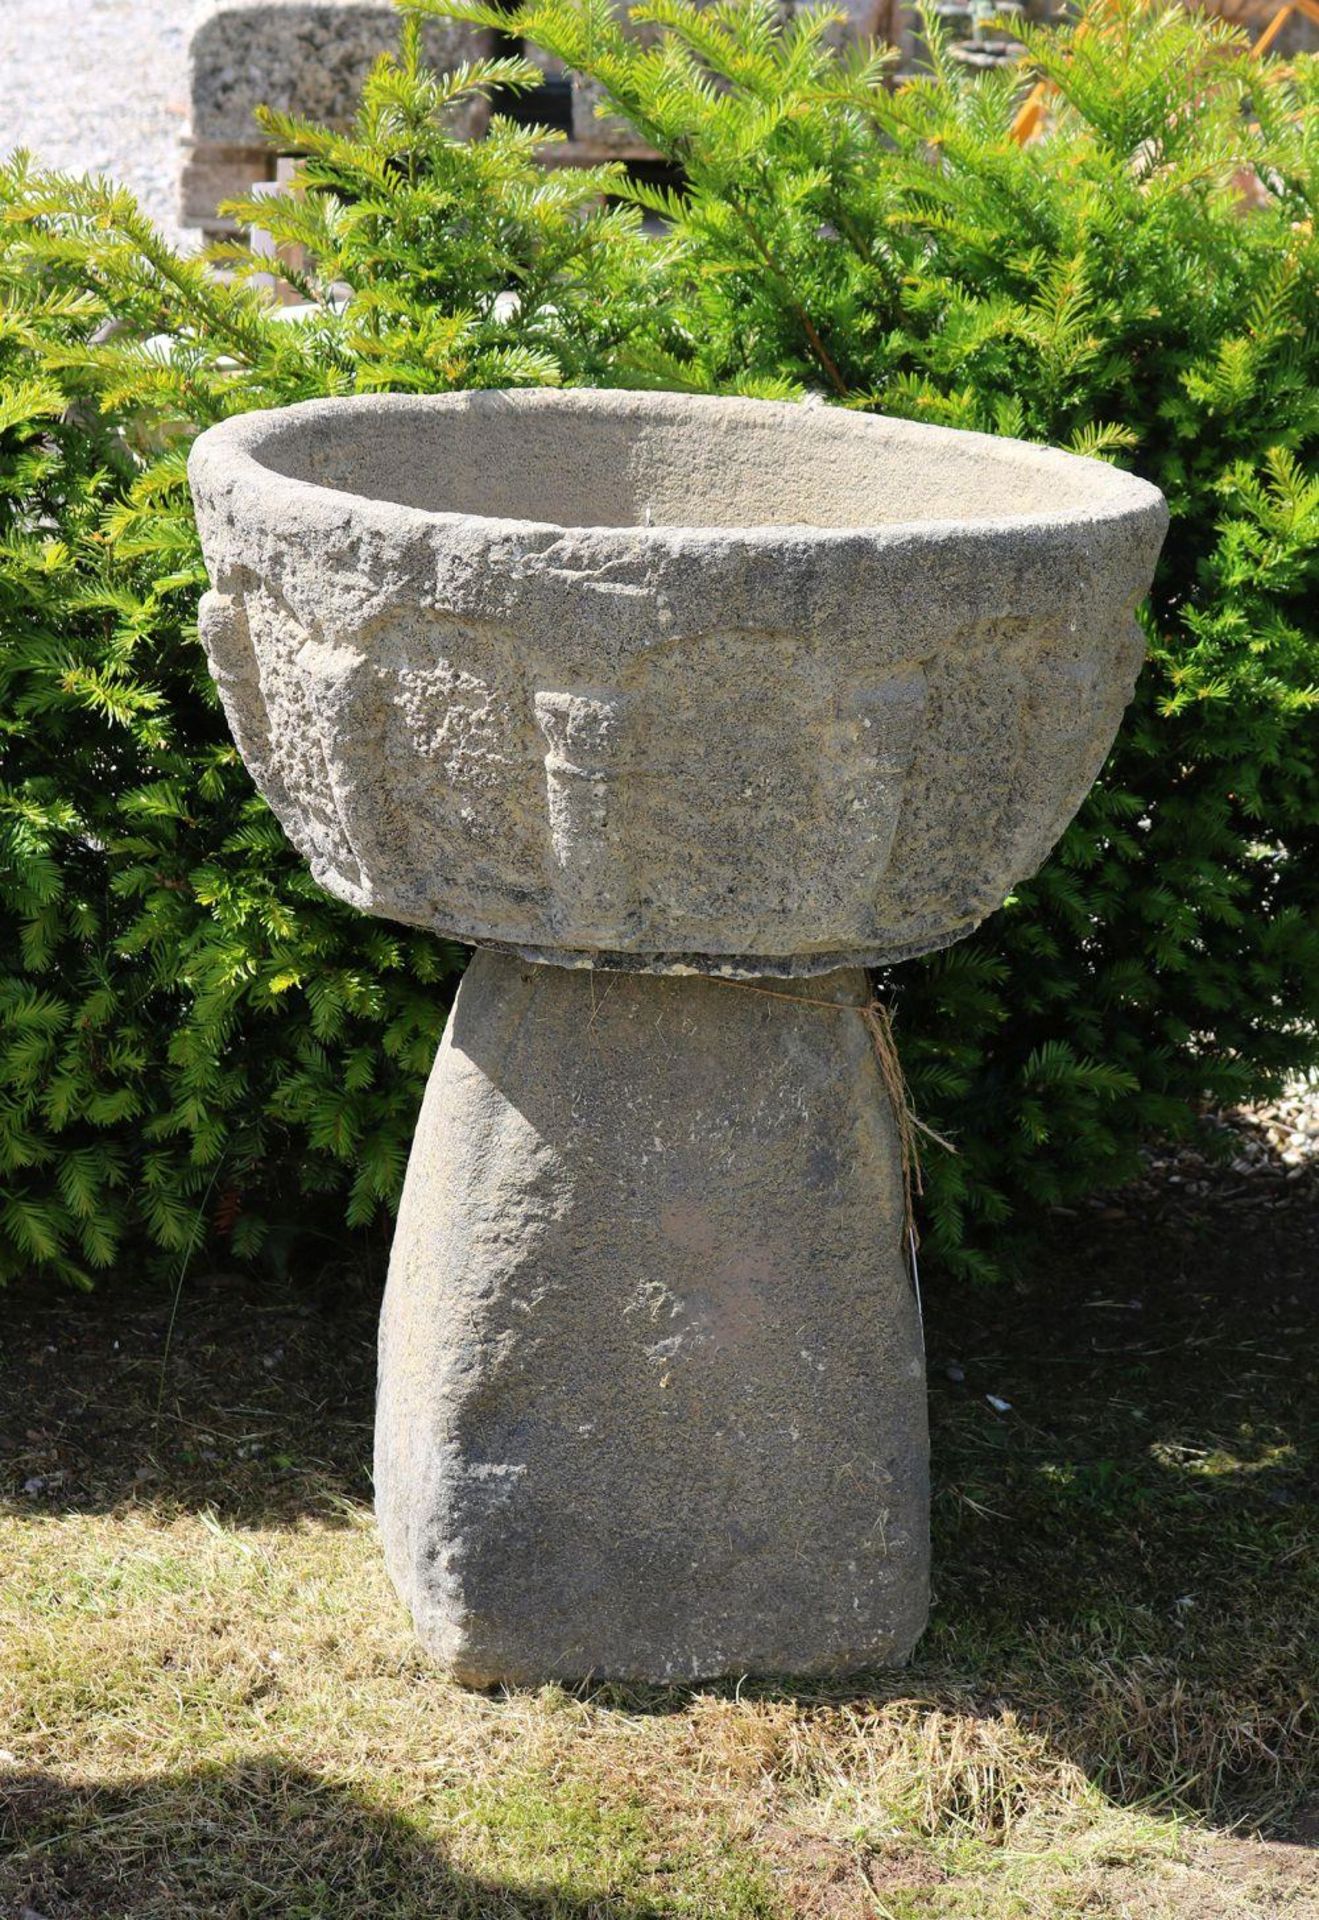 MOULDED STONE MEDIEVAL STYLE URN